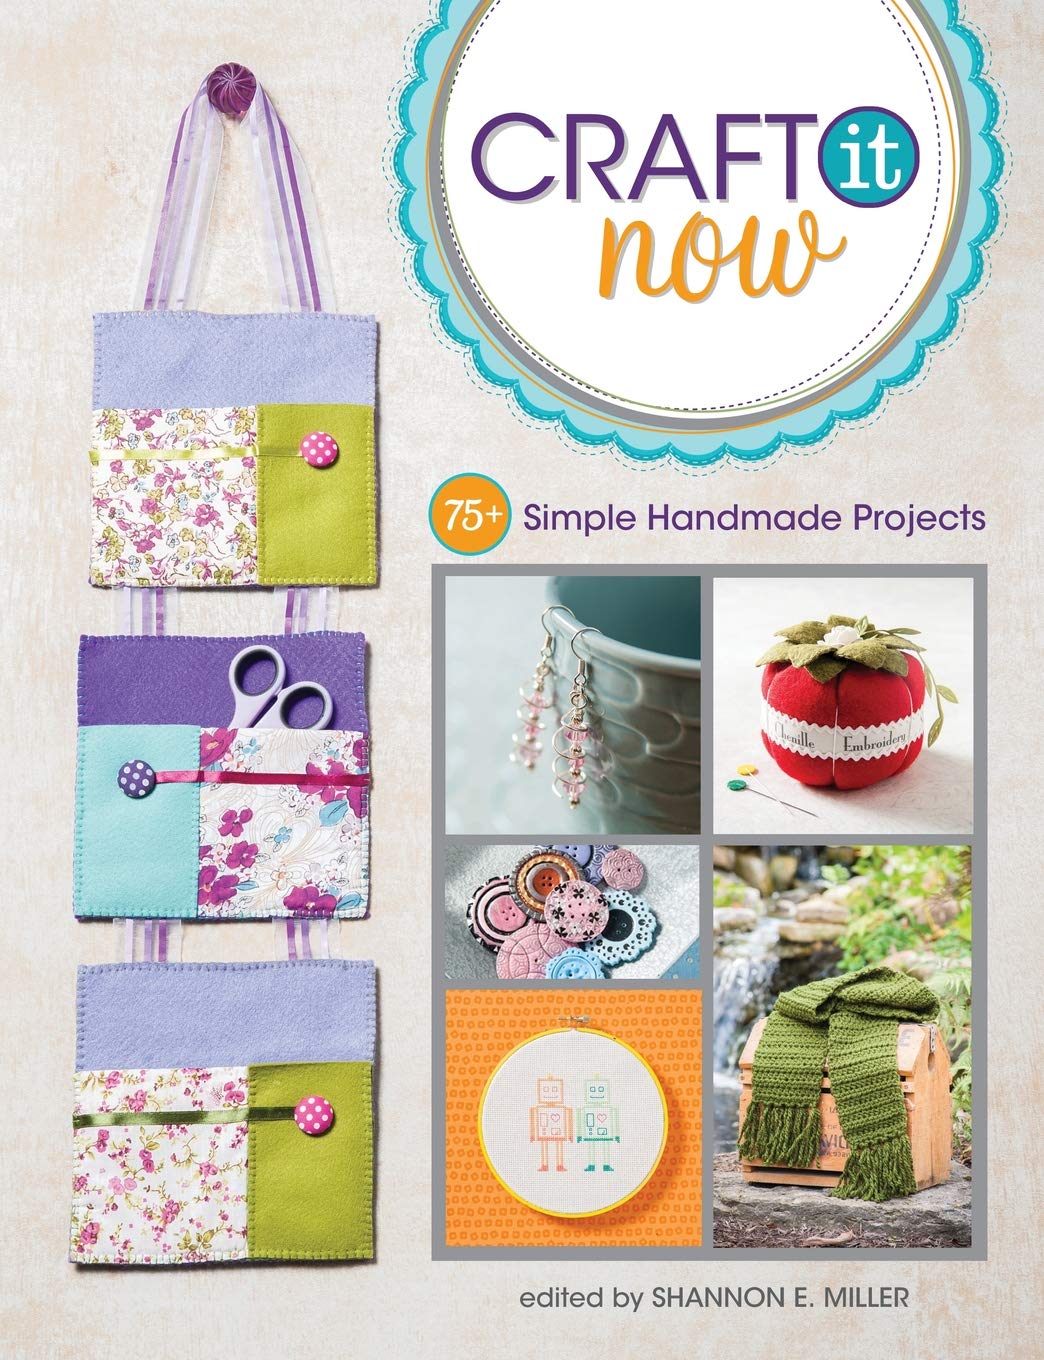 The Very Best Craft Projects from Stitch Craft Create - Shannon E. Miller